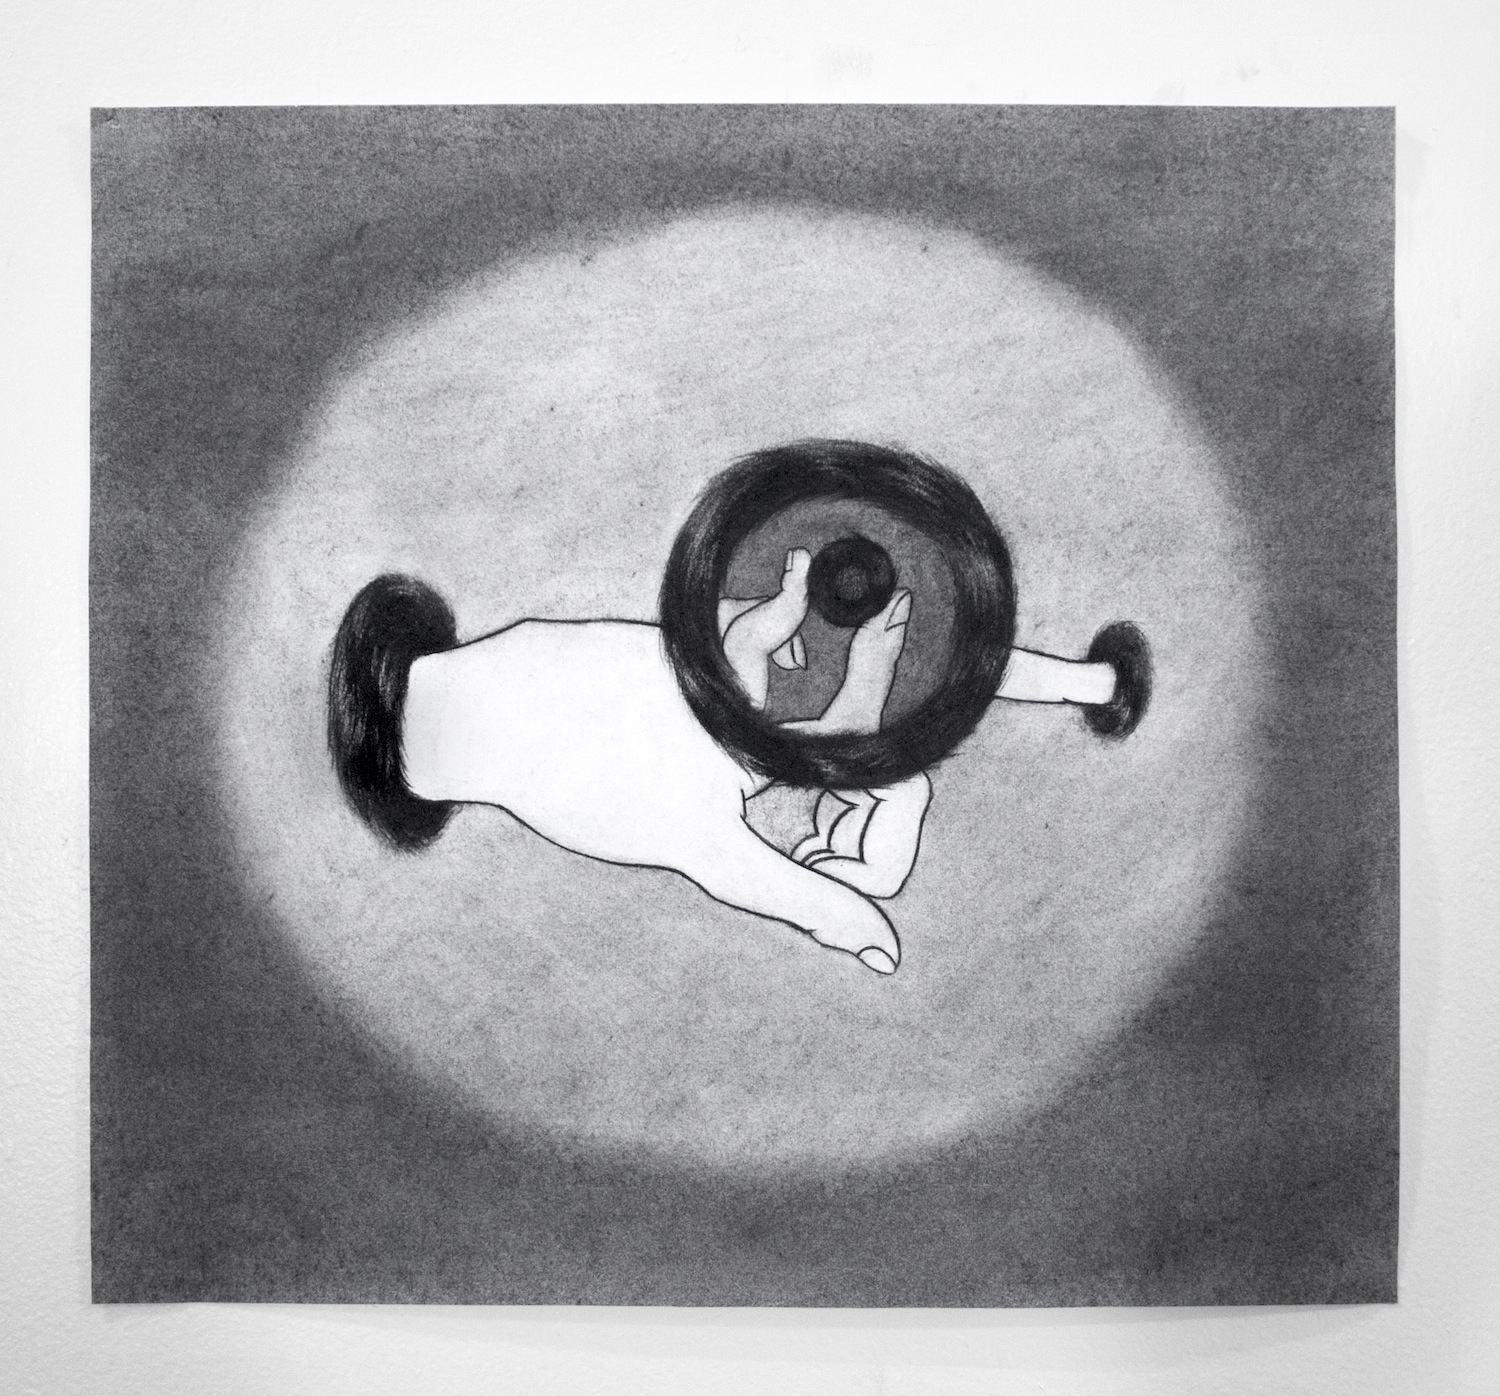 14. Touching, Pointing, 2015